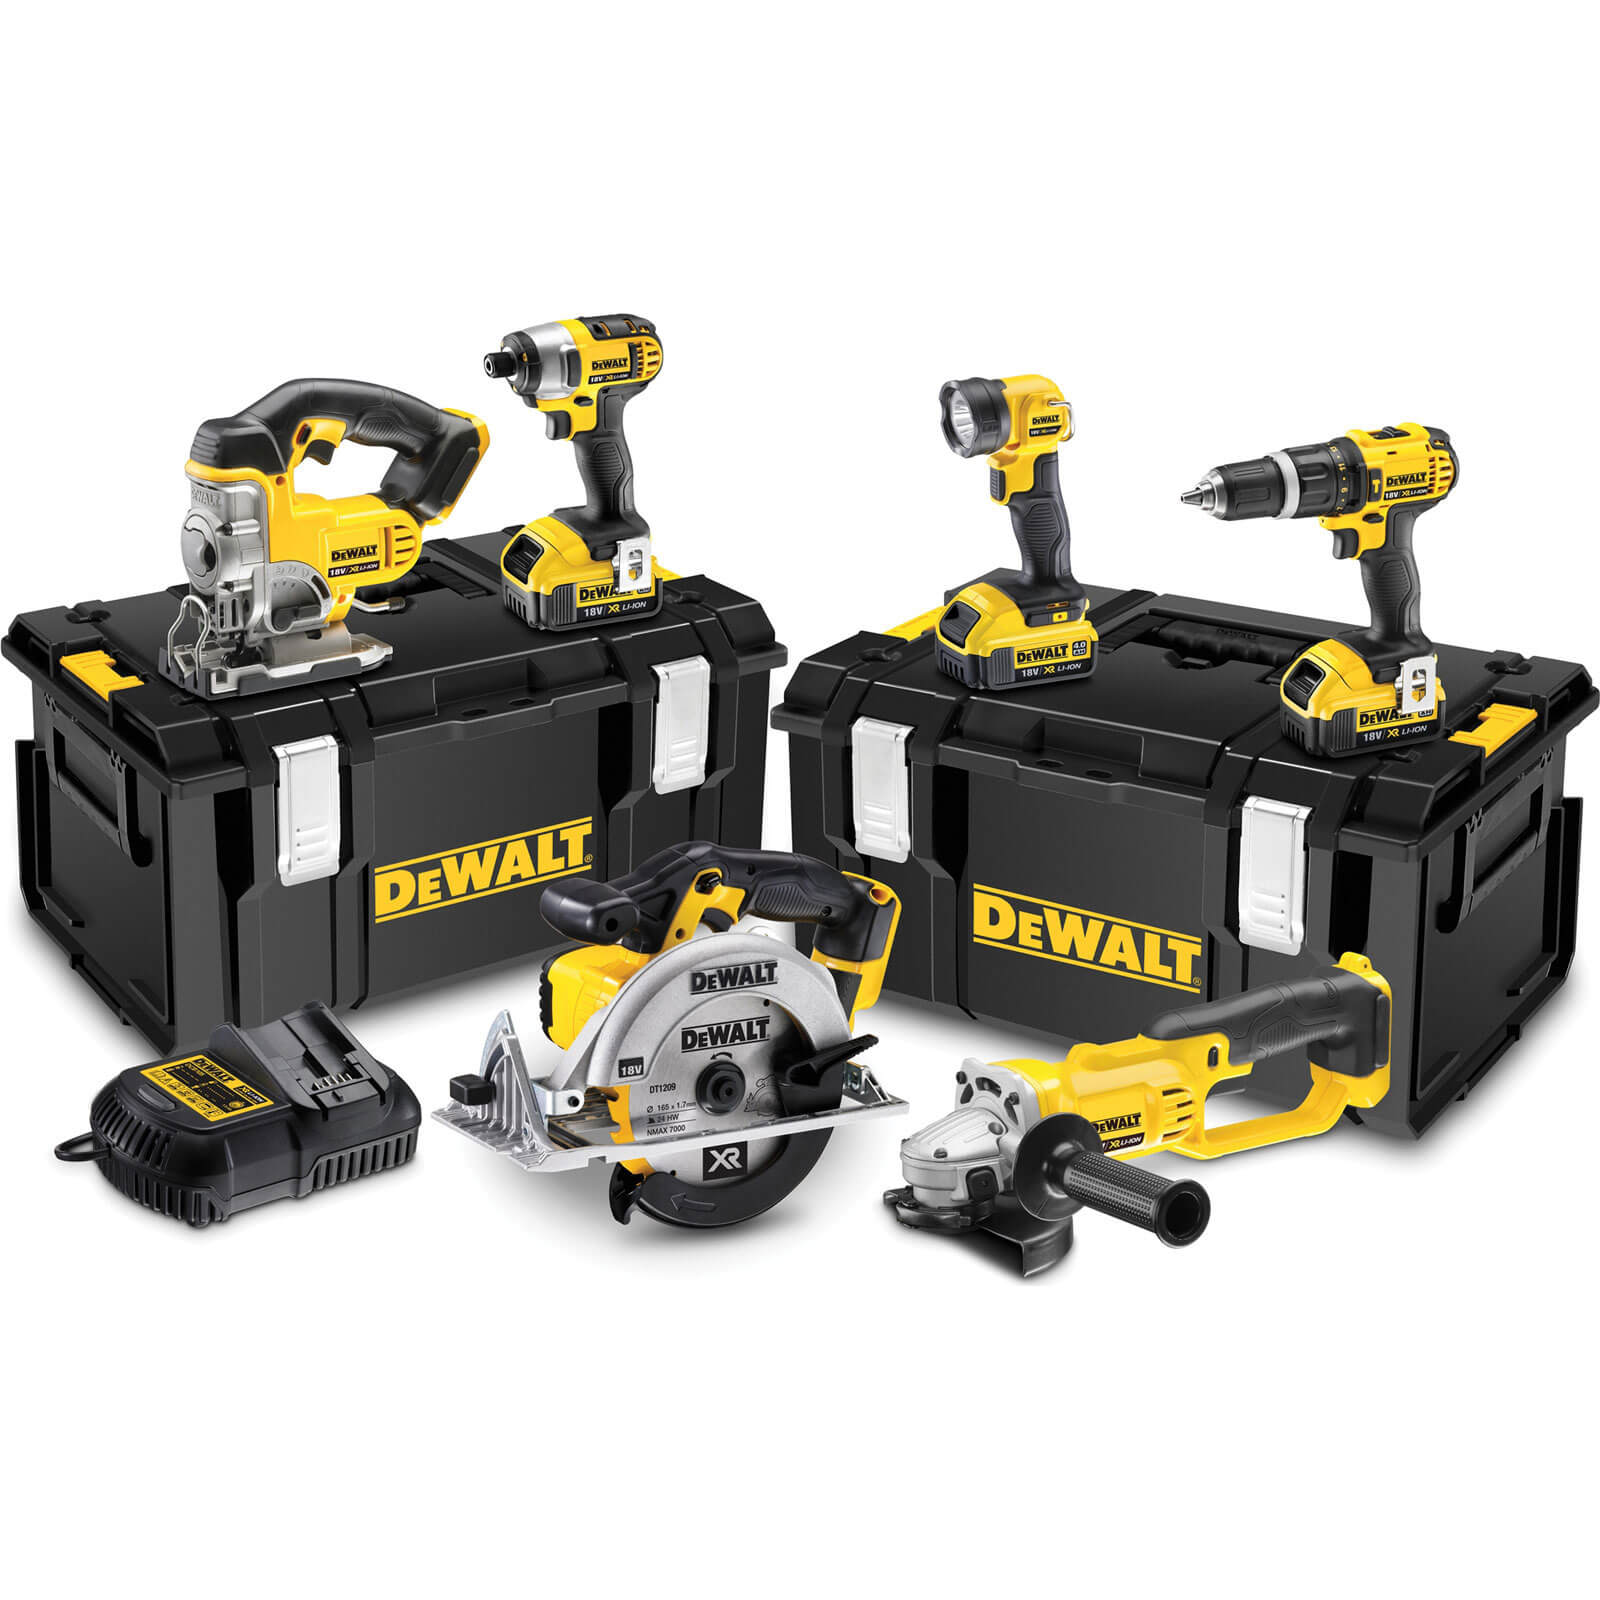 DeWalt DCK691M3 18v Cordless XR 6 Piece Power Tool Kit with 2 Speed Combi with 3 Lithium Ion Batteri